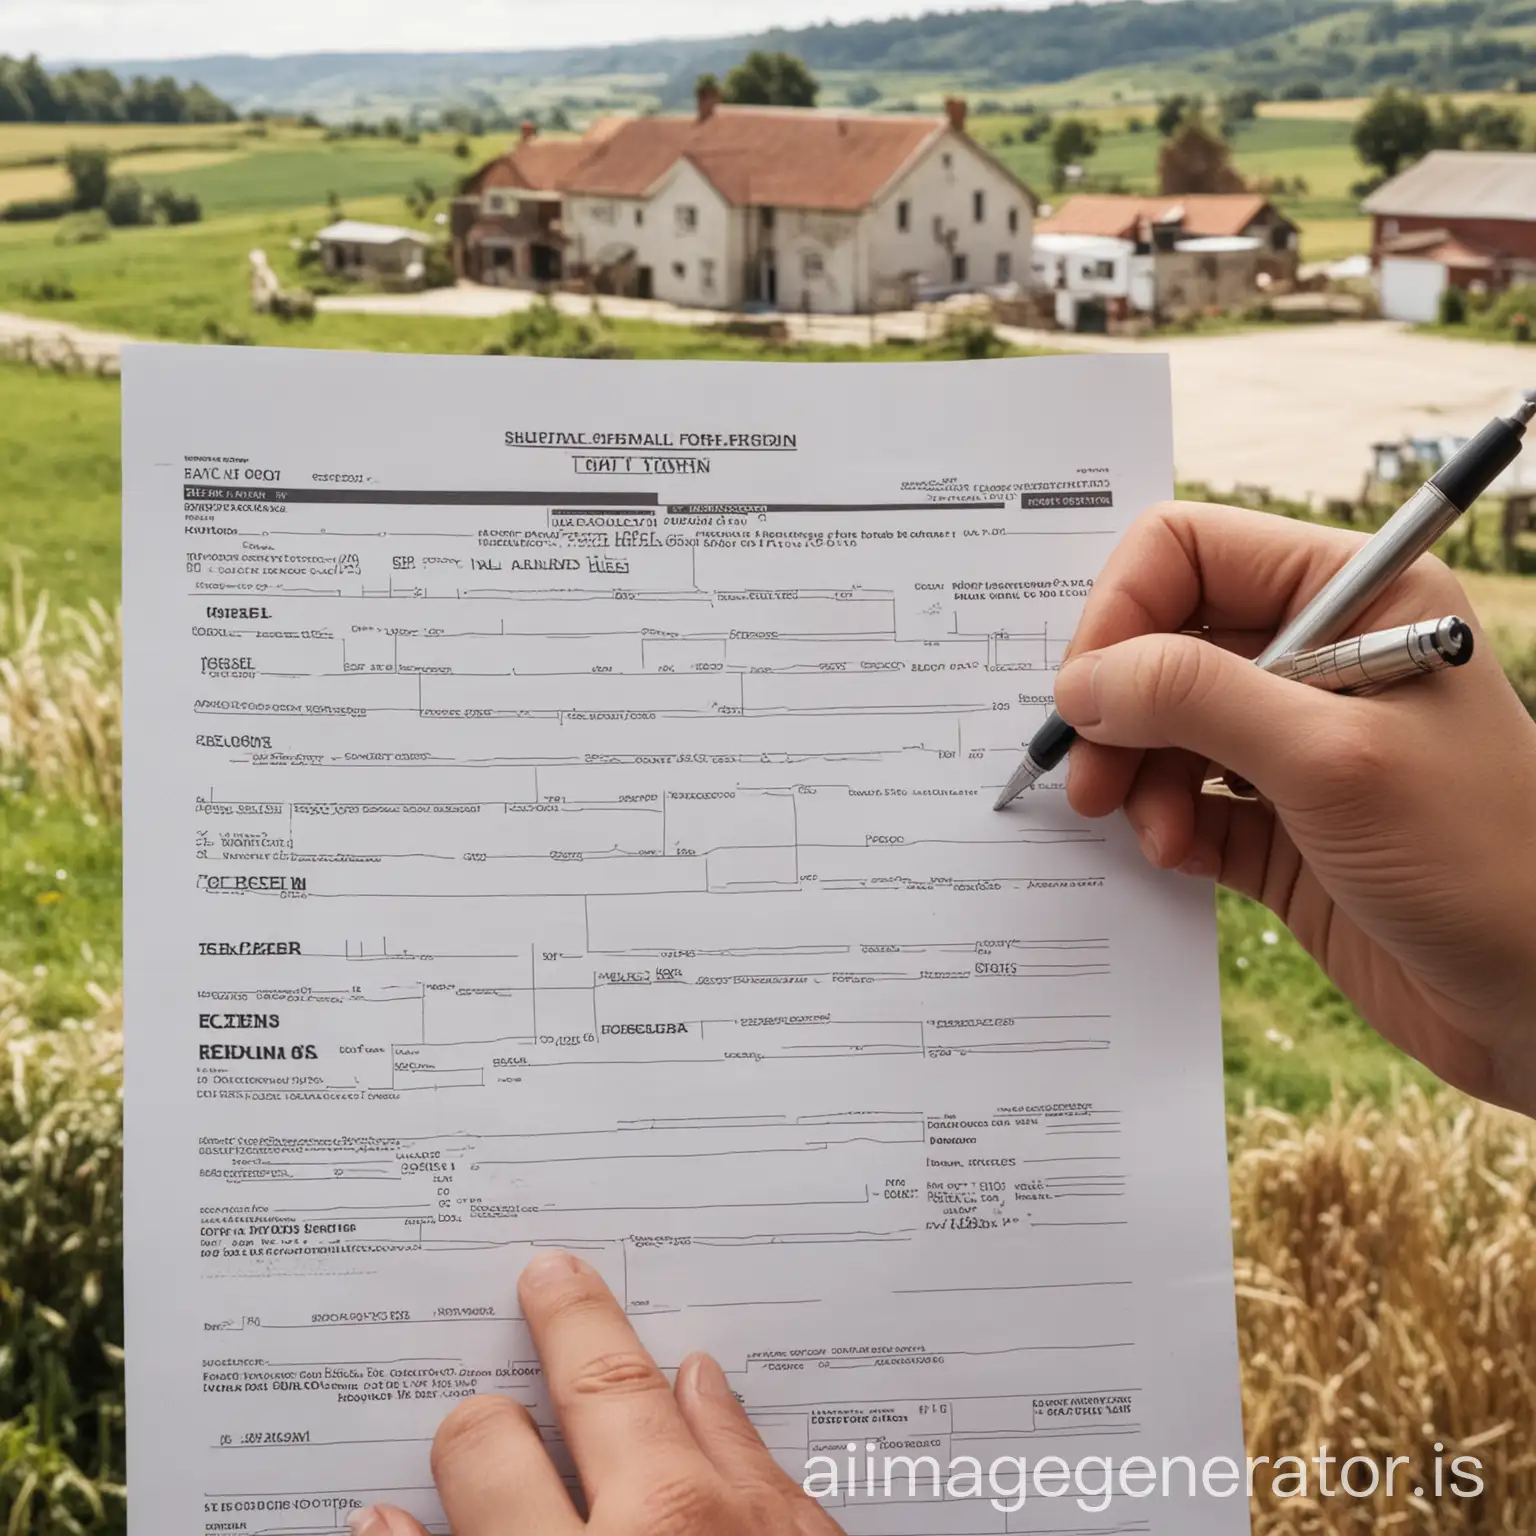 Hand-Filling-Out-Form-with-Rural-Property-in-Background